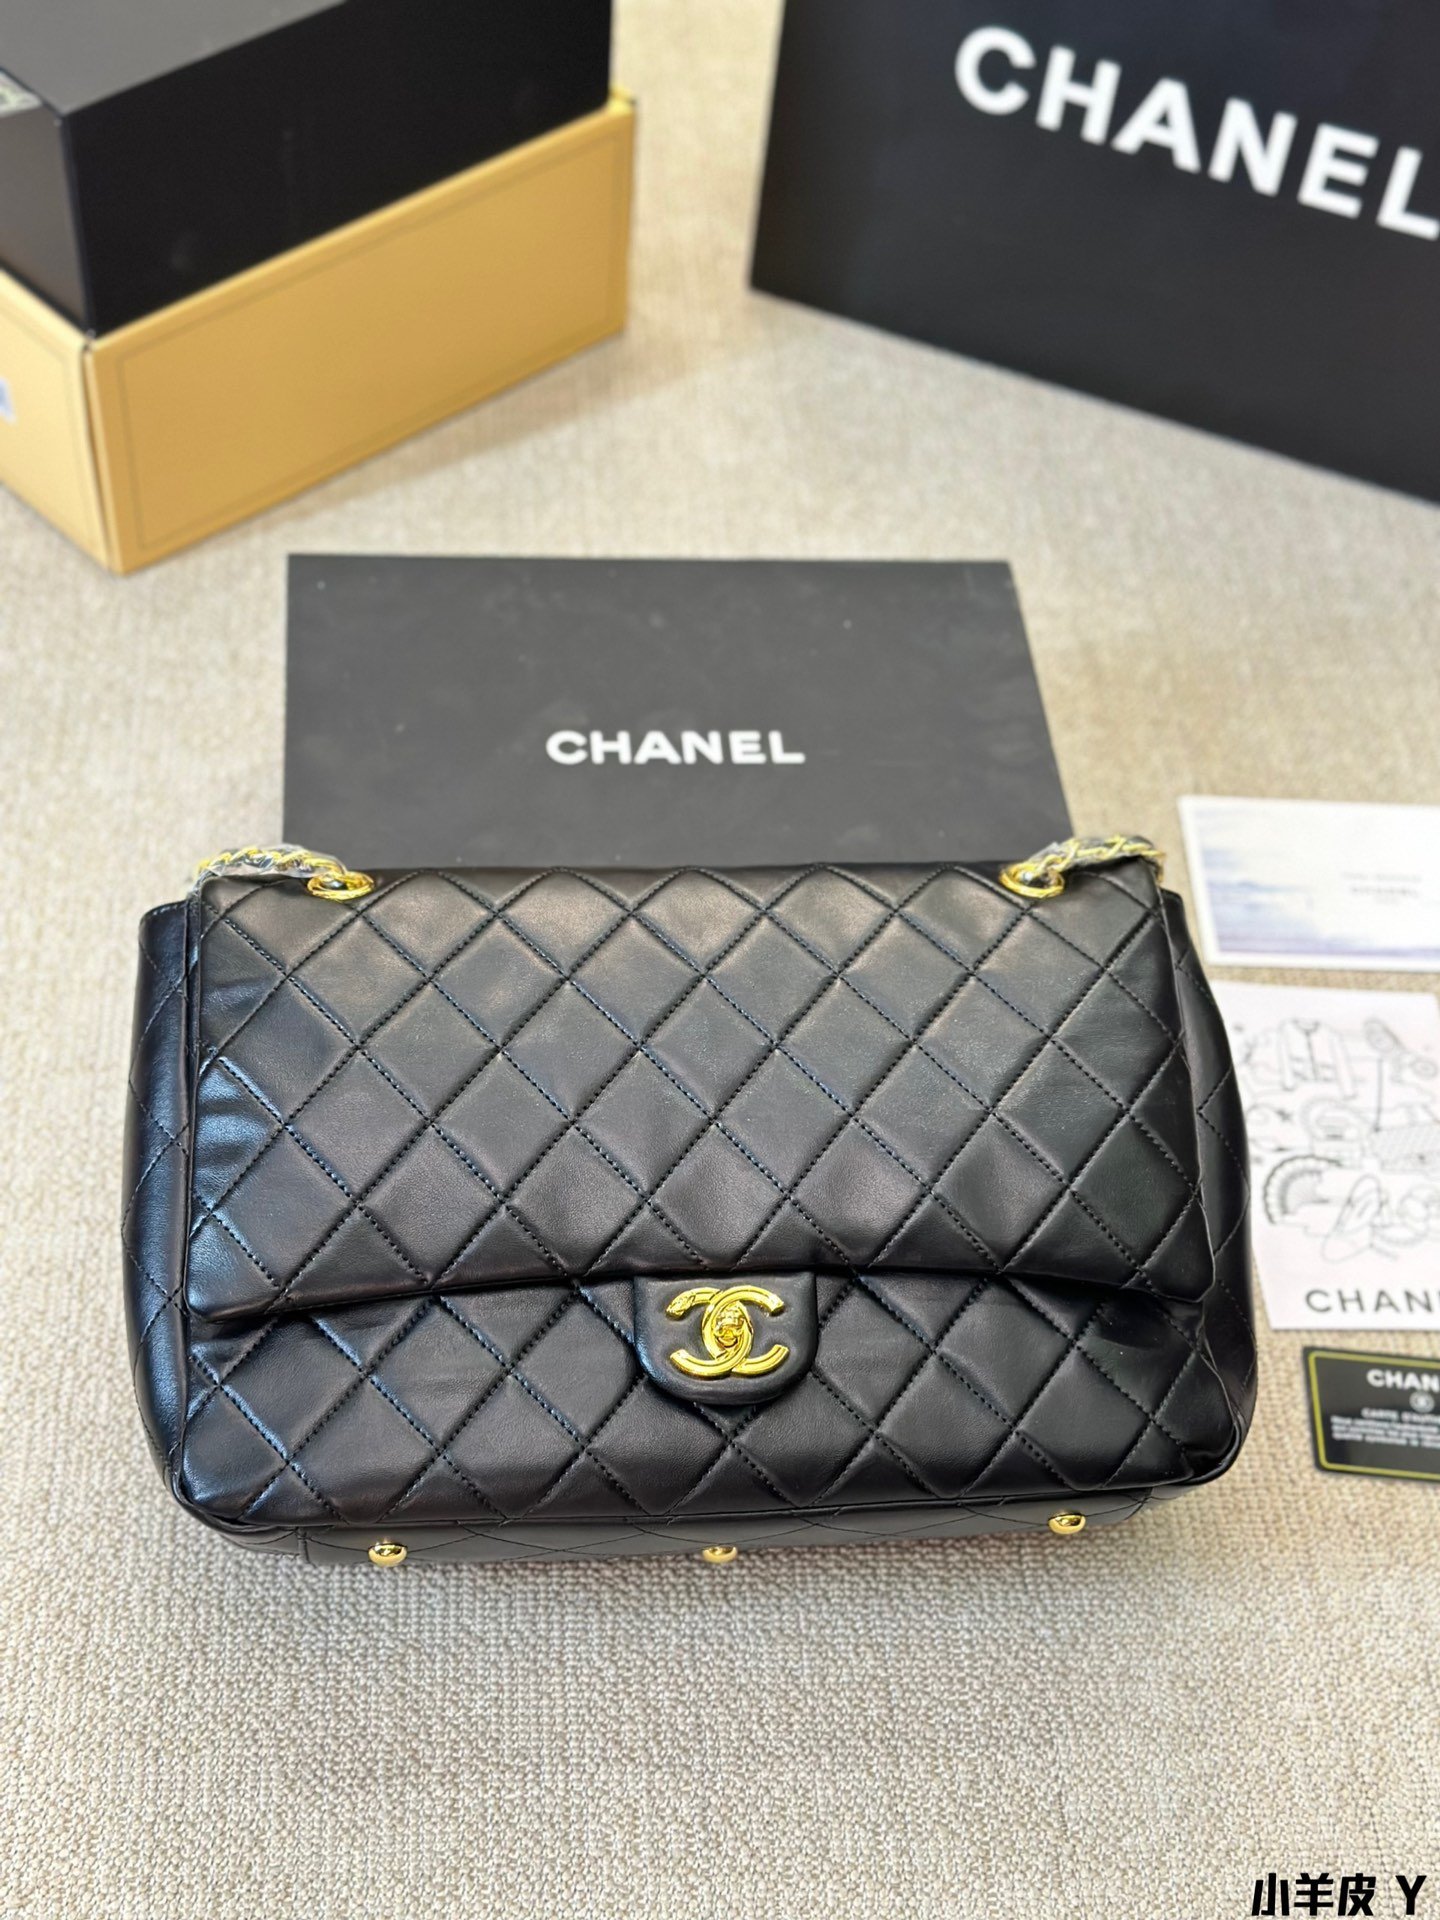 Chanel Large Capacity Leather Bag